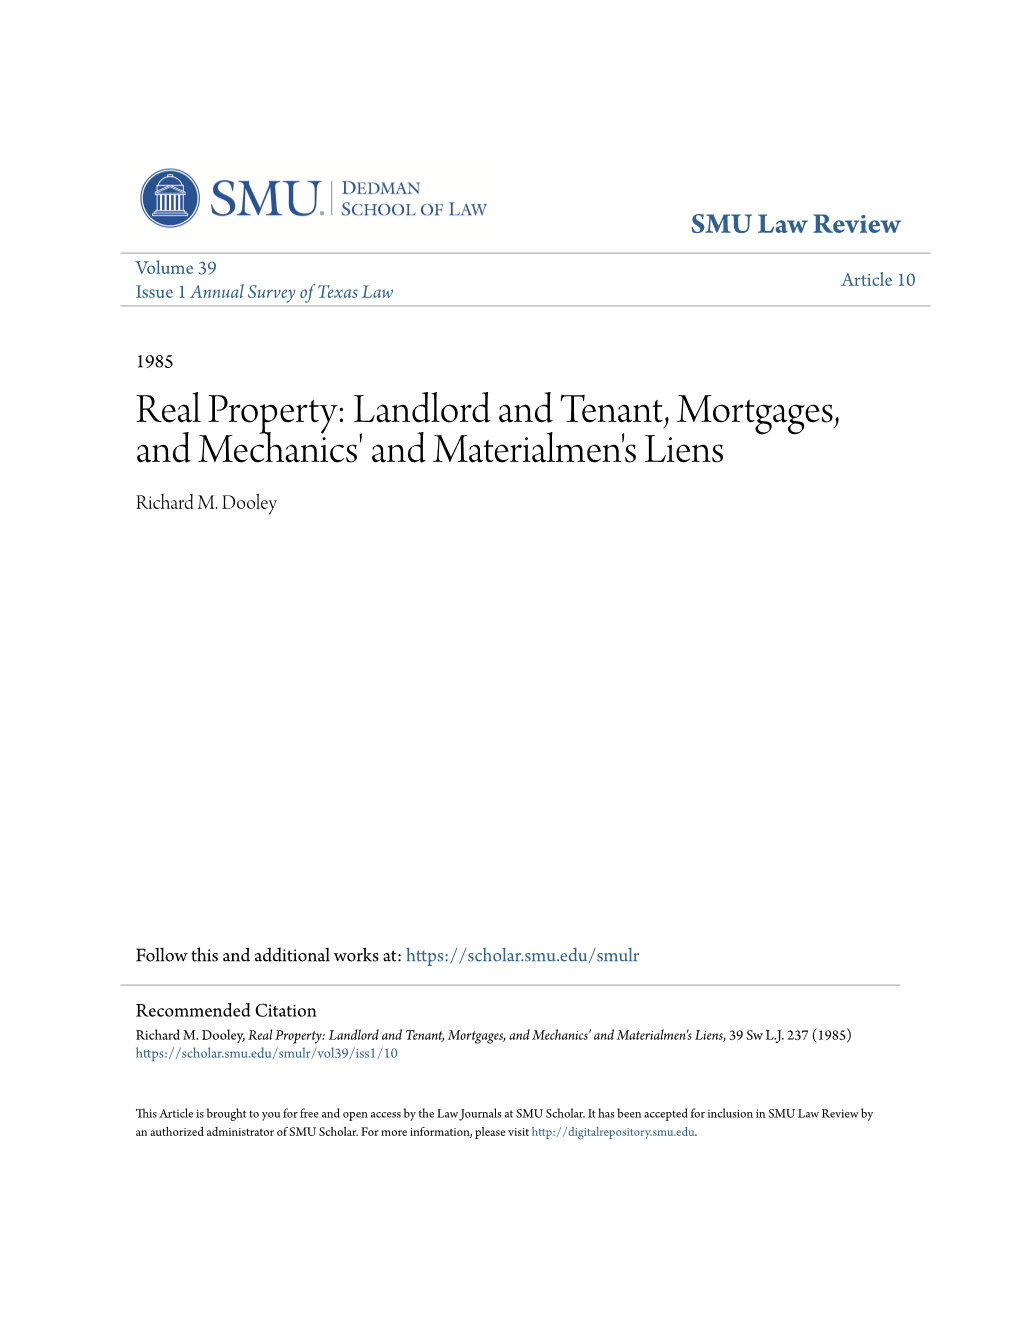 Real Property: Landlord and Tenant, Mortgages, and Mechanics' and Materialmen's Liens Richard M